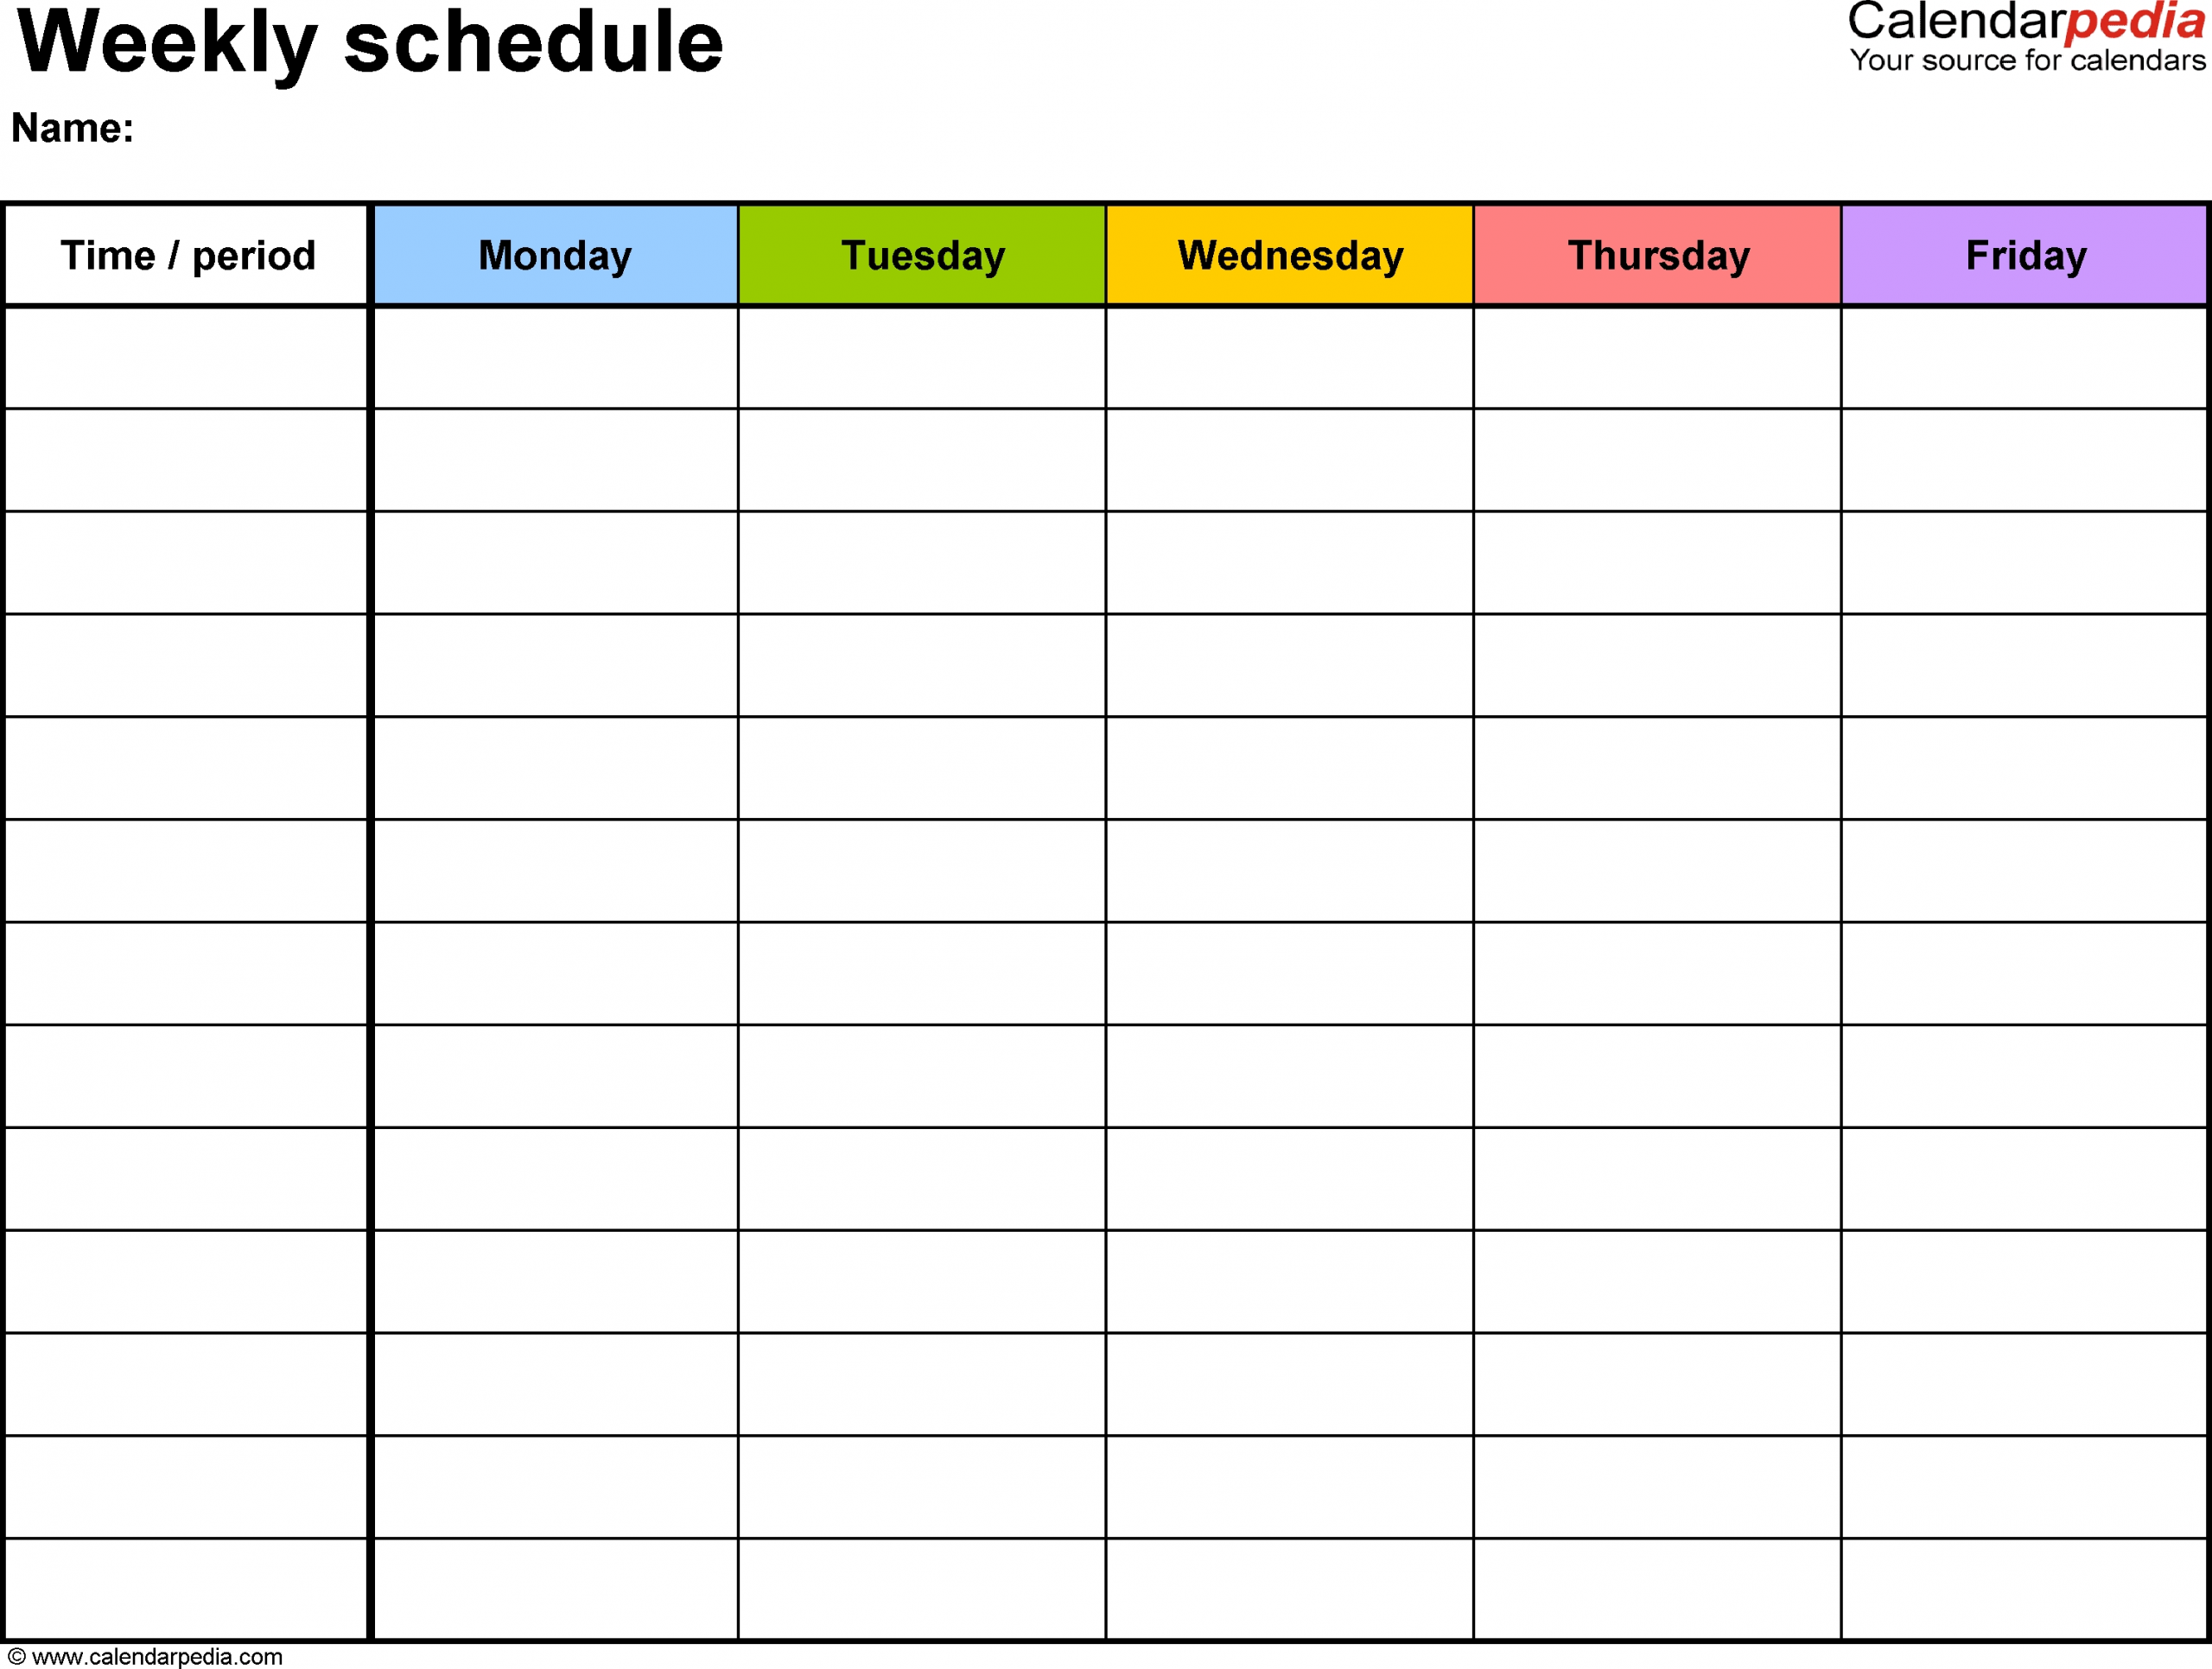 Free Weekly Schedule Templates For Word - 18 Templates in 5 Day Weekly Schedule Template